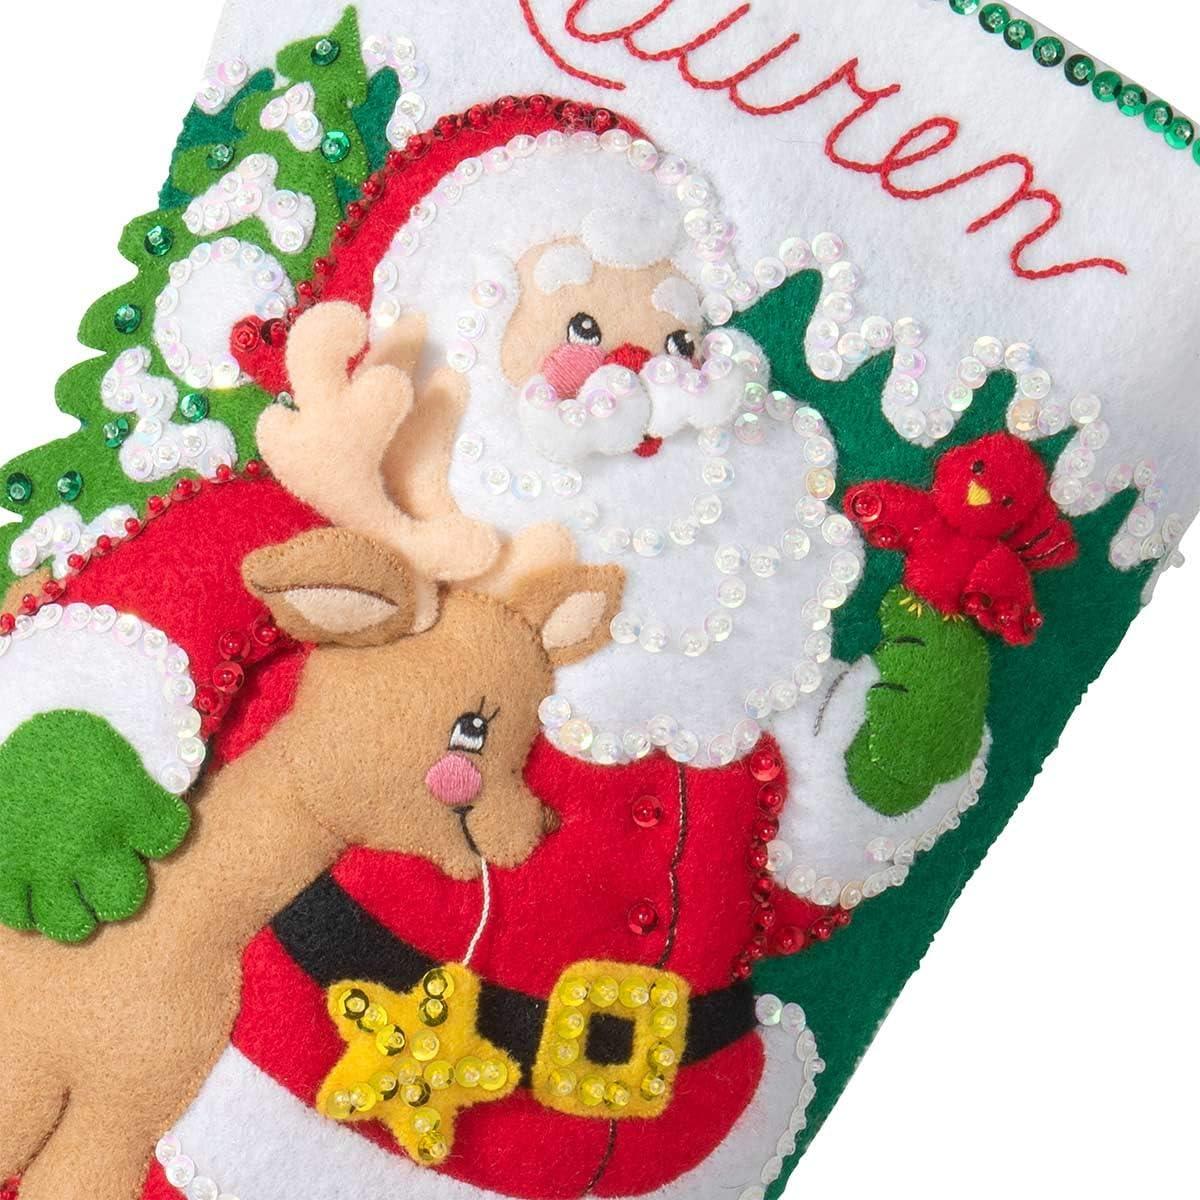 MSCFTFB 28 Pieces Christmas Felt Applique Kits Santa Christmas Bells Deer  Tree Gift Boxes Non Woven Fabric Patches Stickers Badge for Hair  Accessories